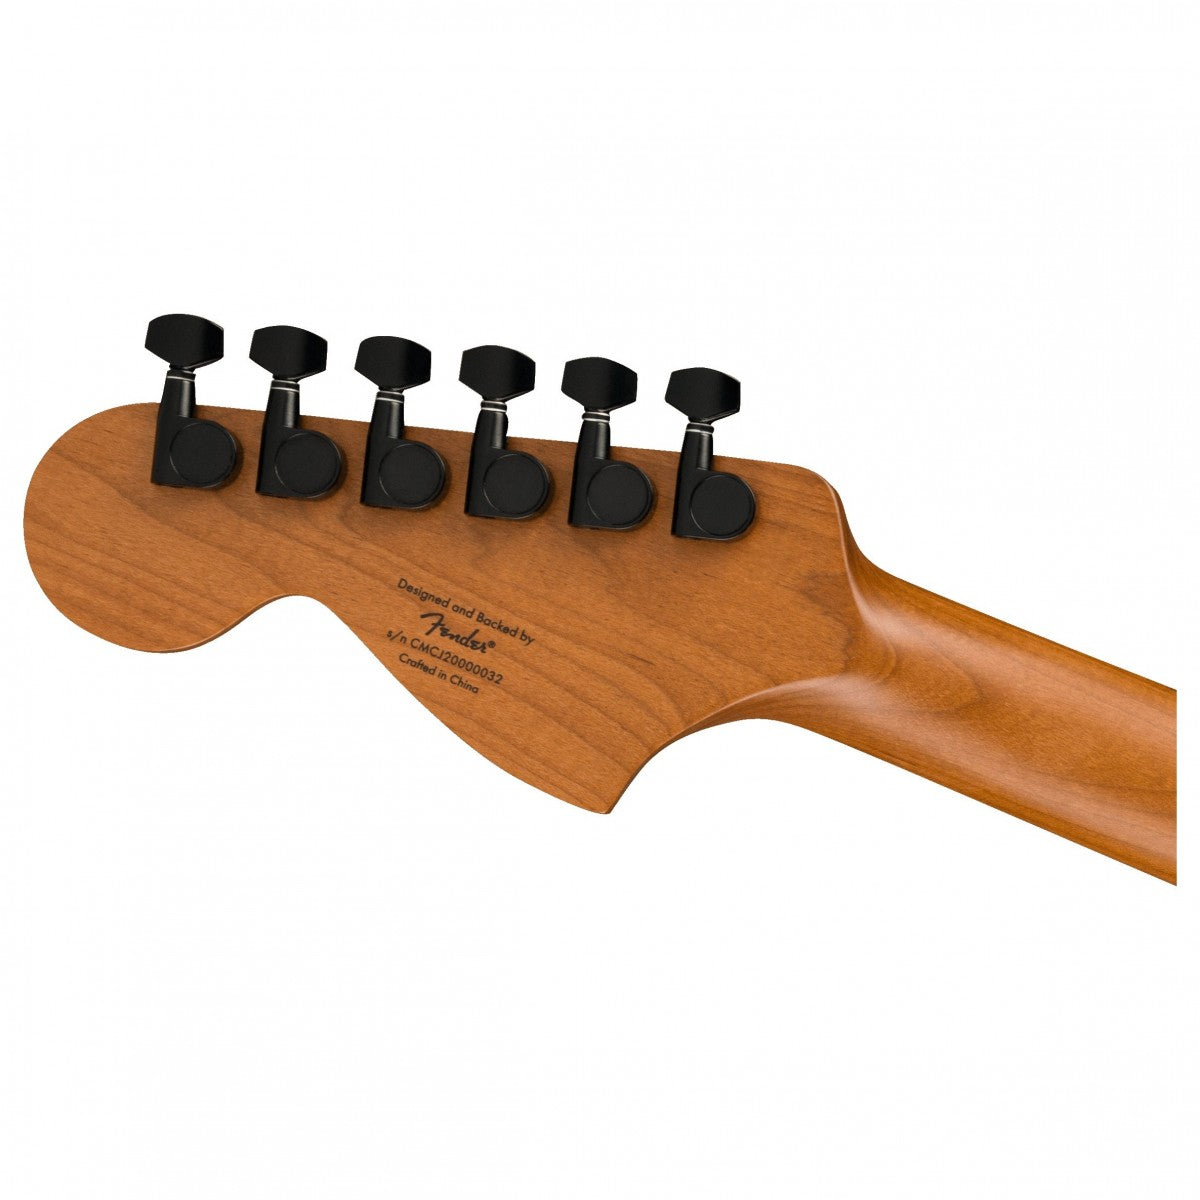 Squier Contemporary Stratocaster Special HT, Laurel Fingerboard - Việt Music